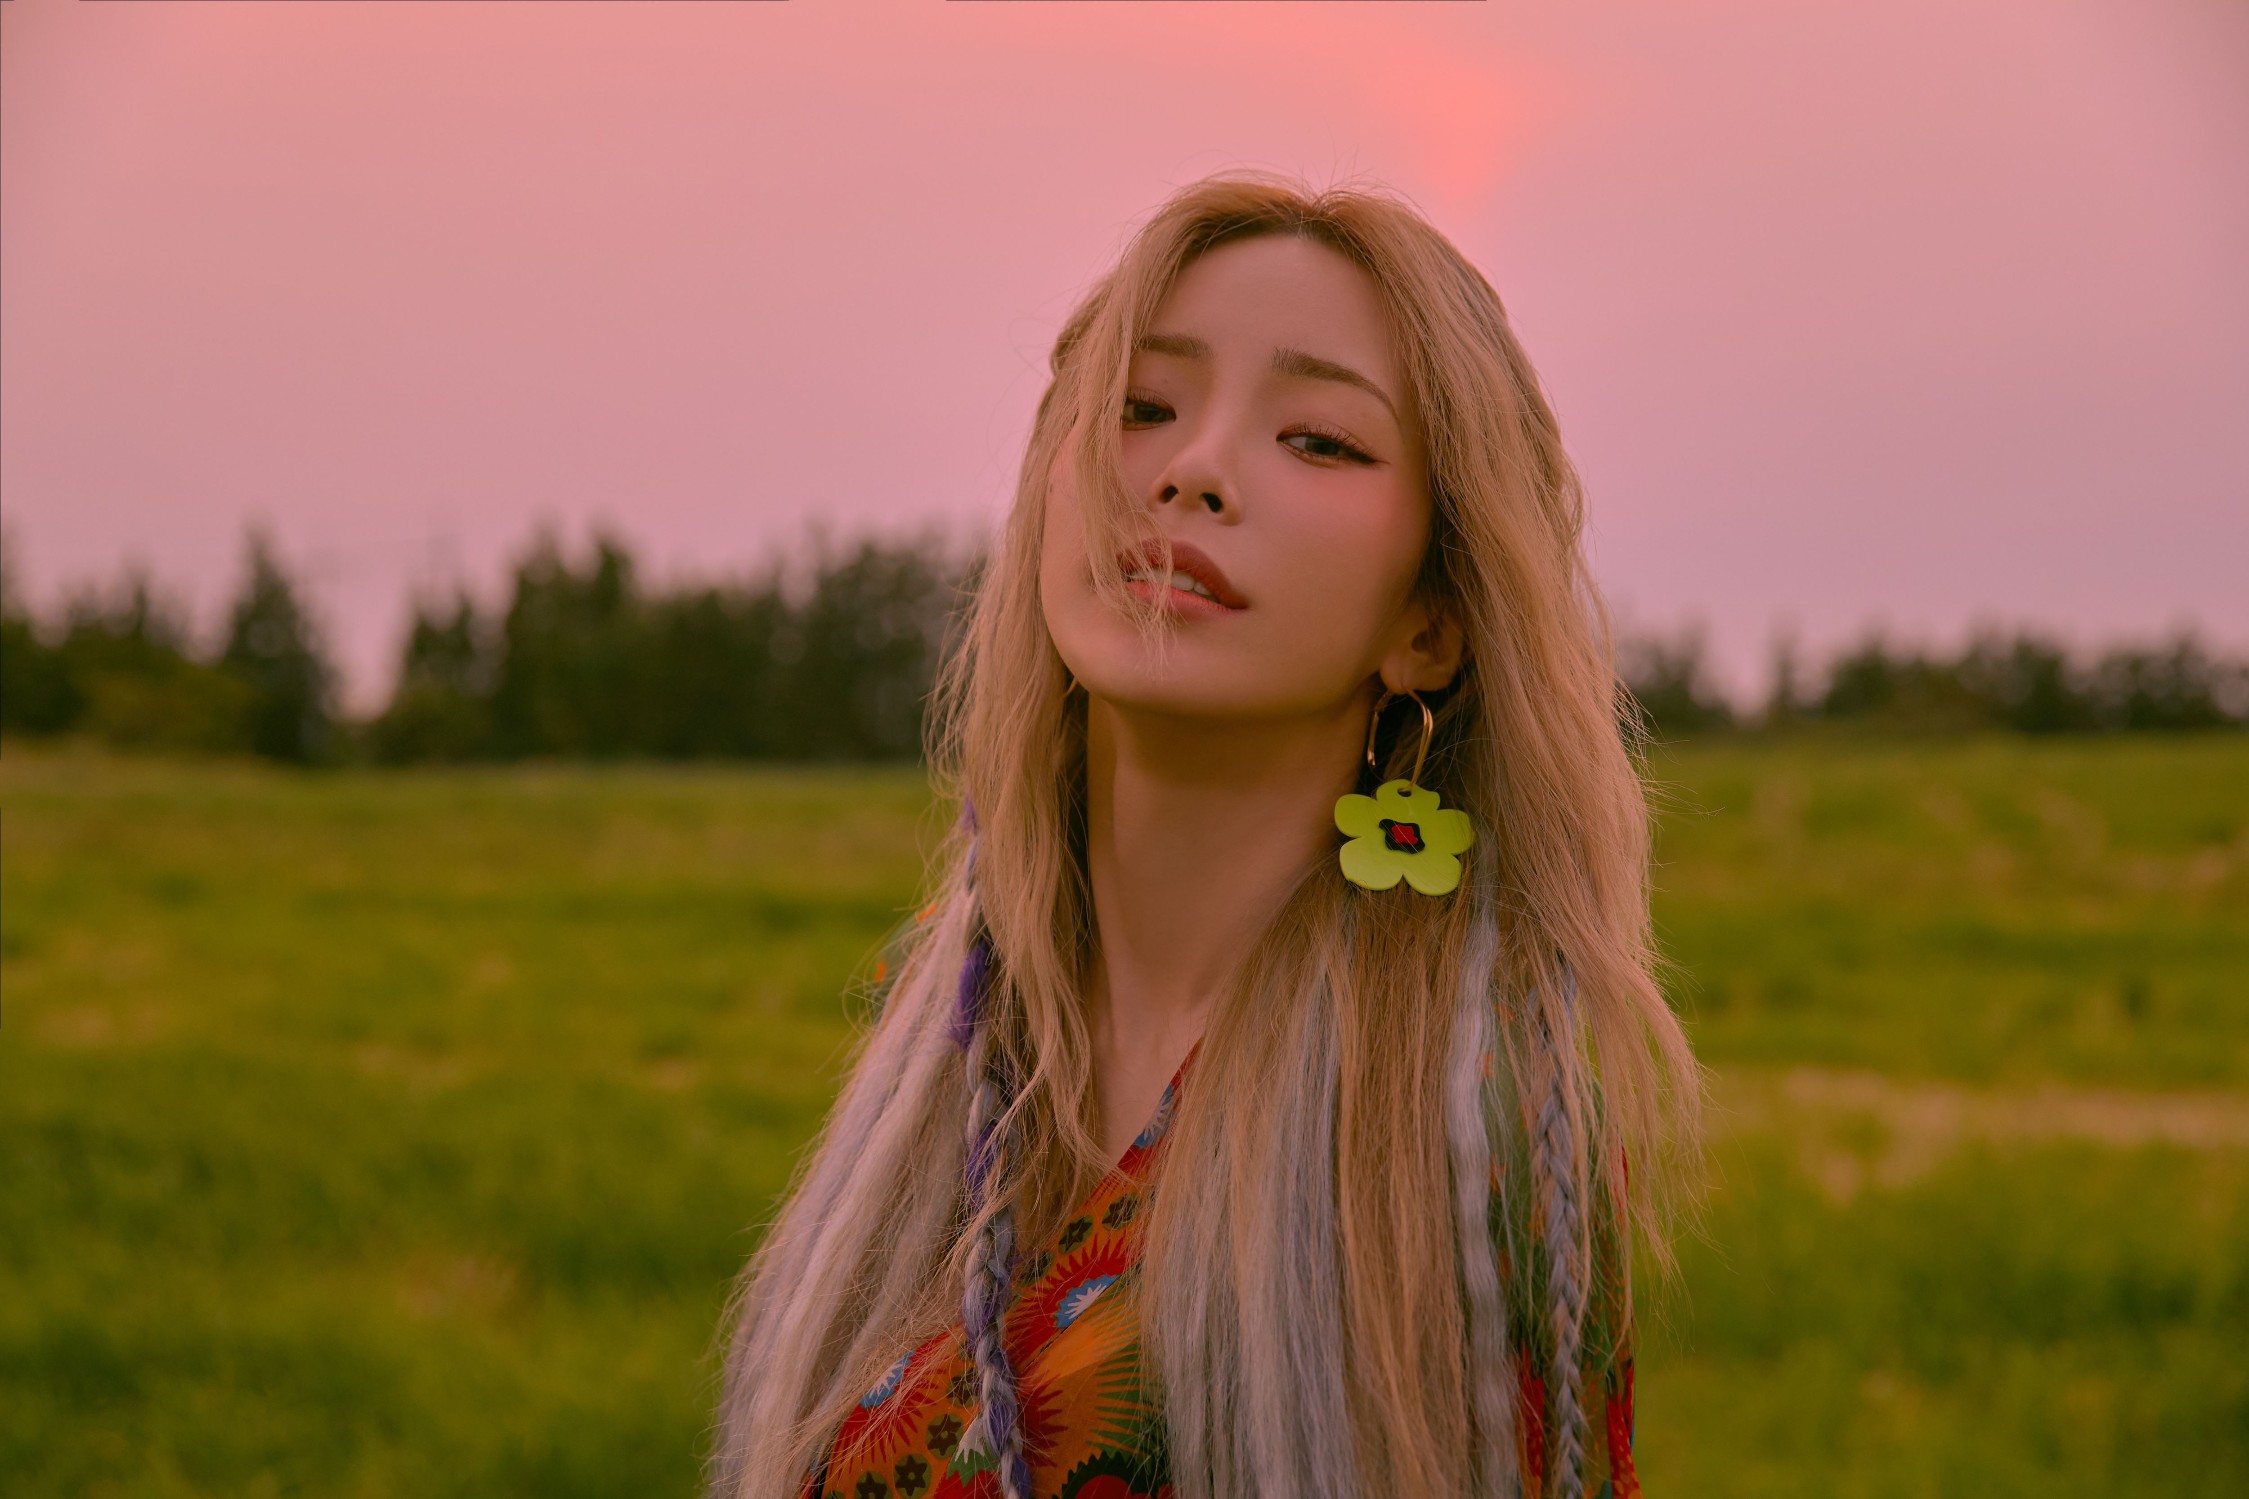 heize-signs-exclusive-contract-with-psys-agency-p-nation-after-leaving-cj-enm-3